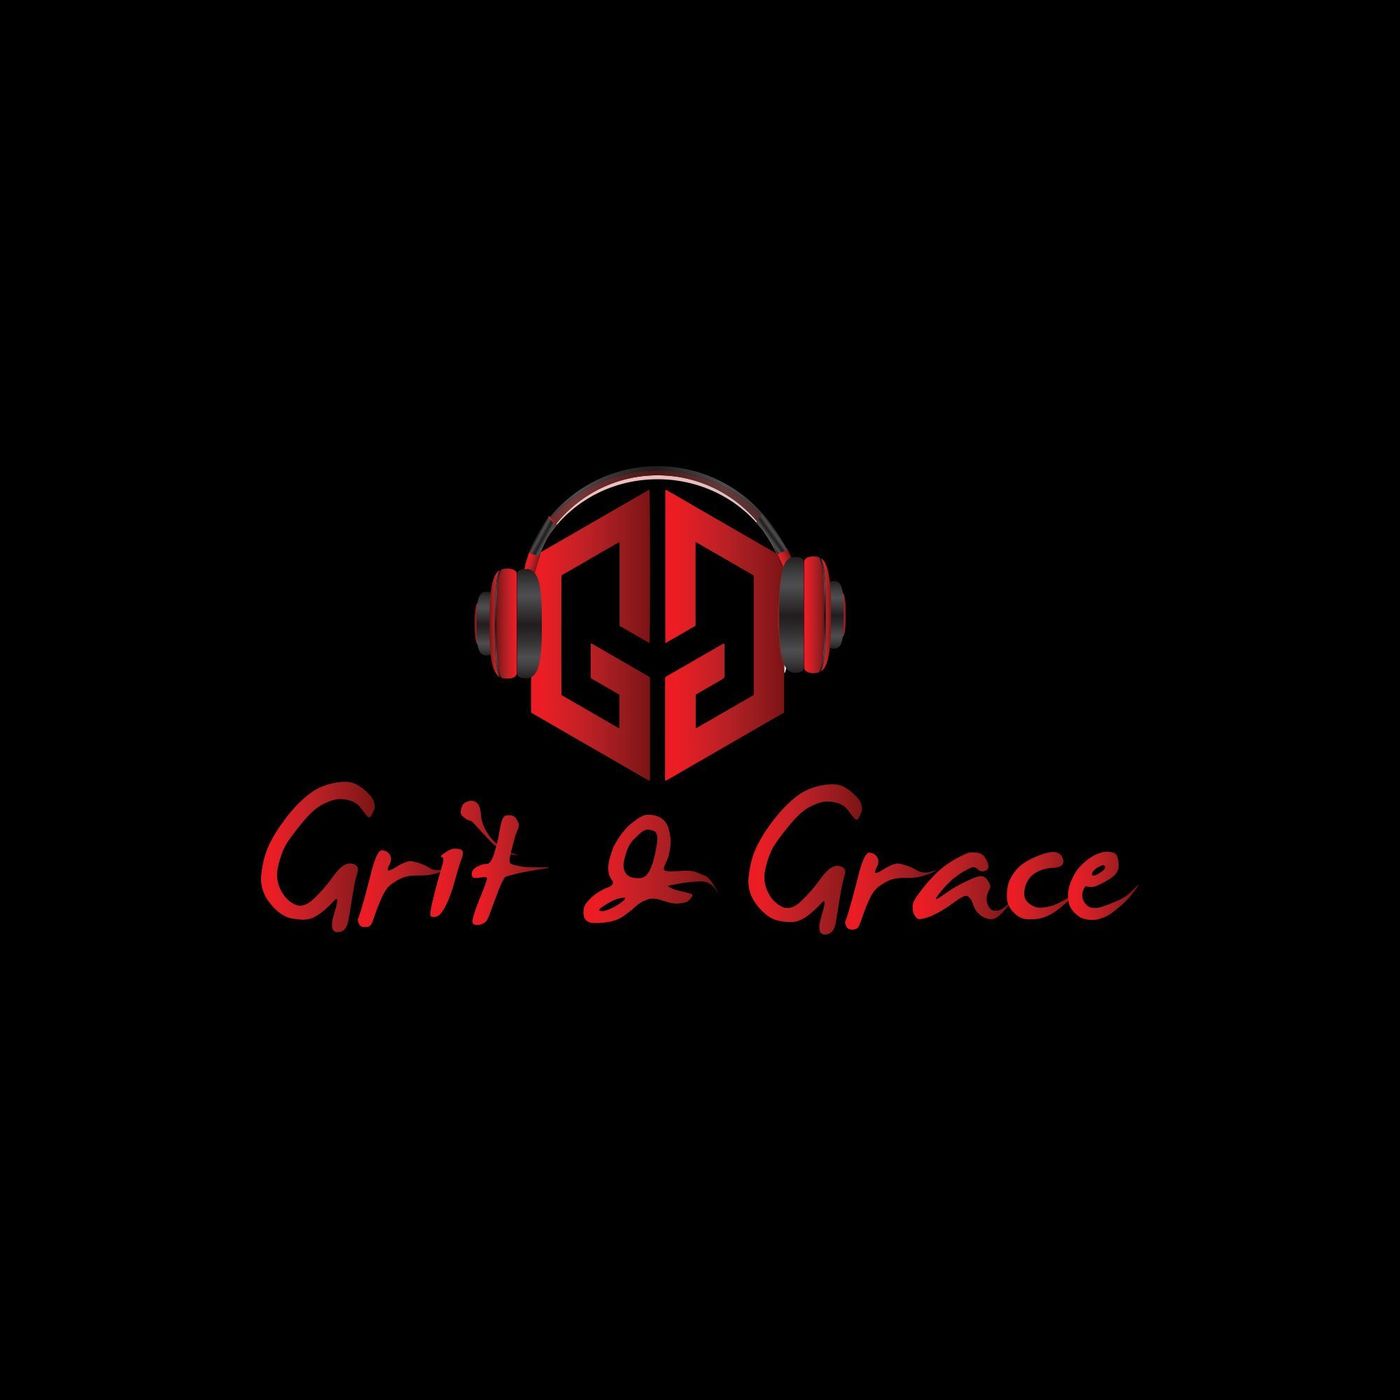 Grit and Grace: How to Increase Focus and Productivity